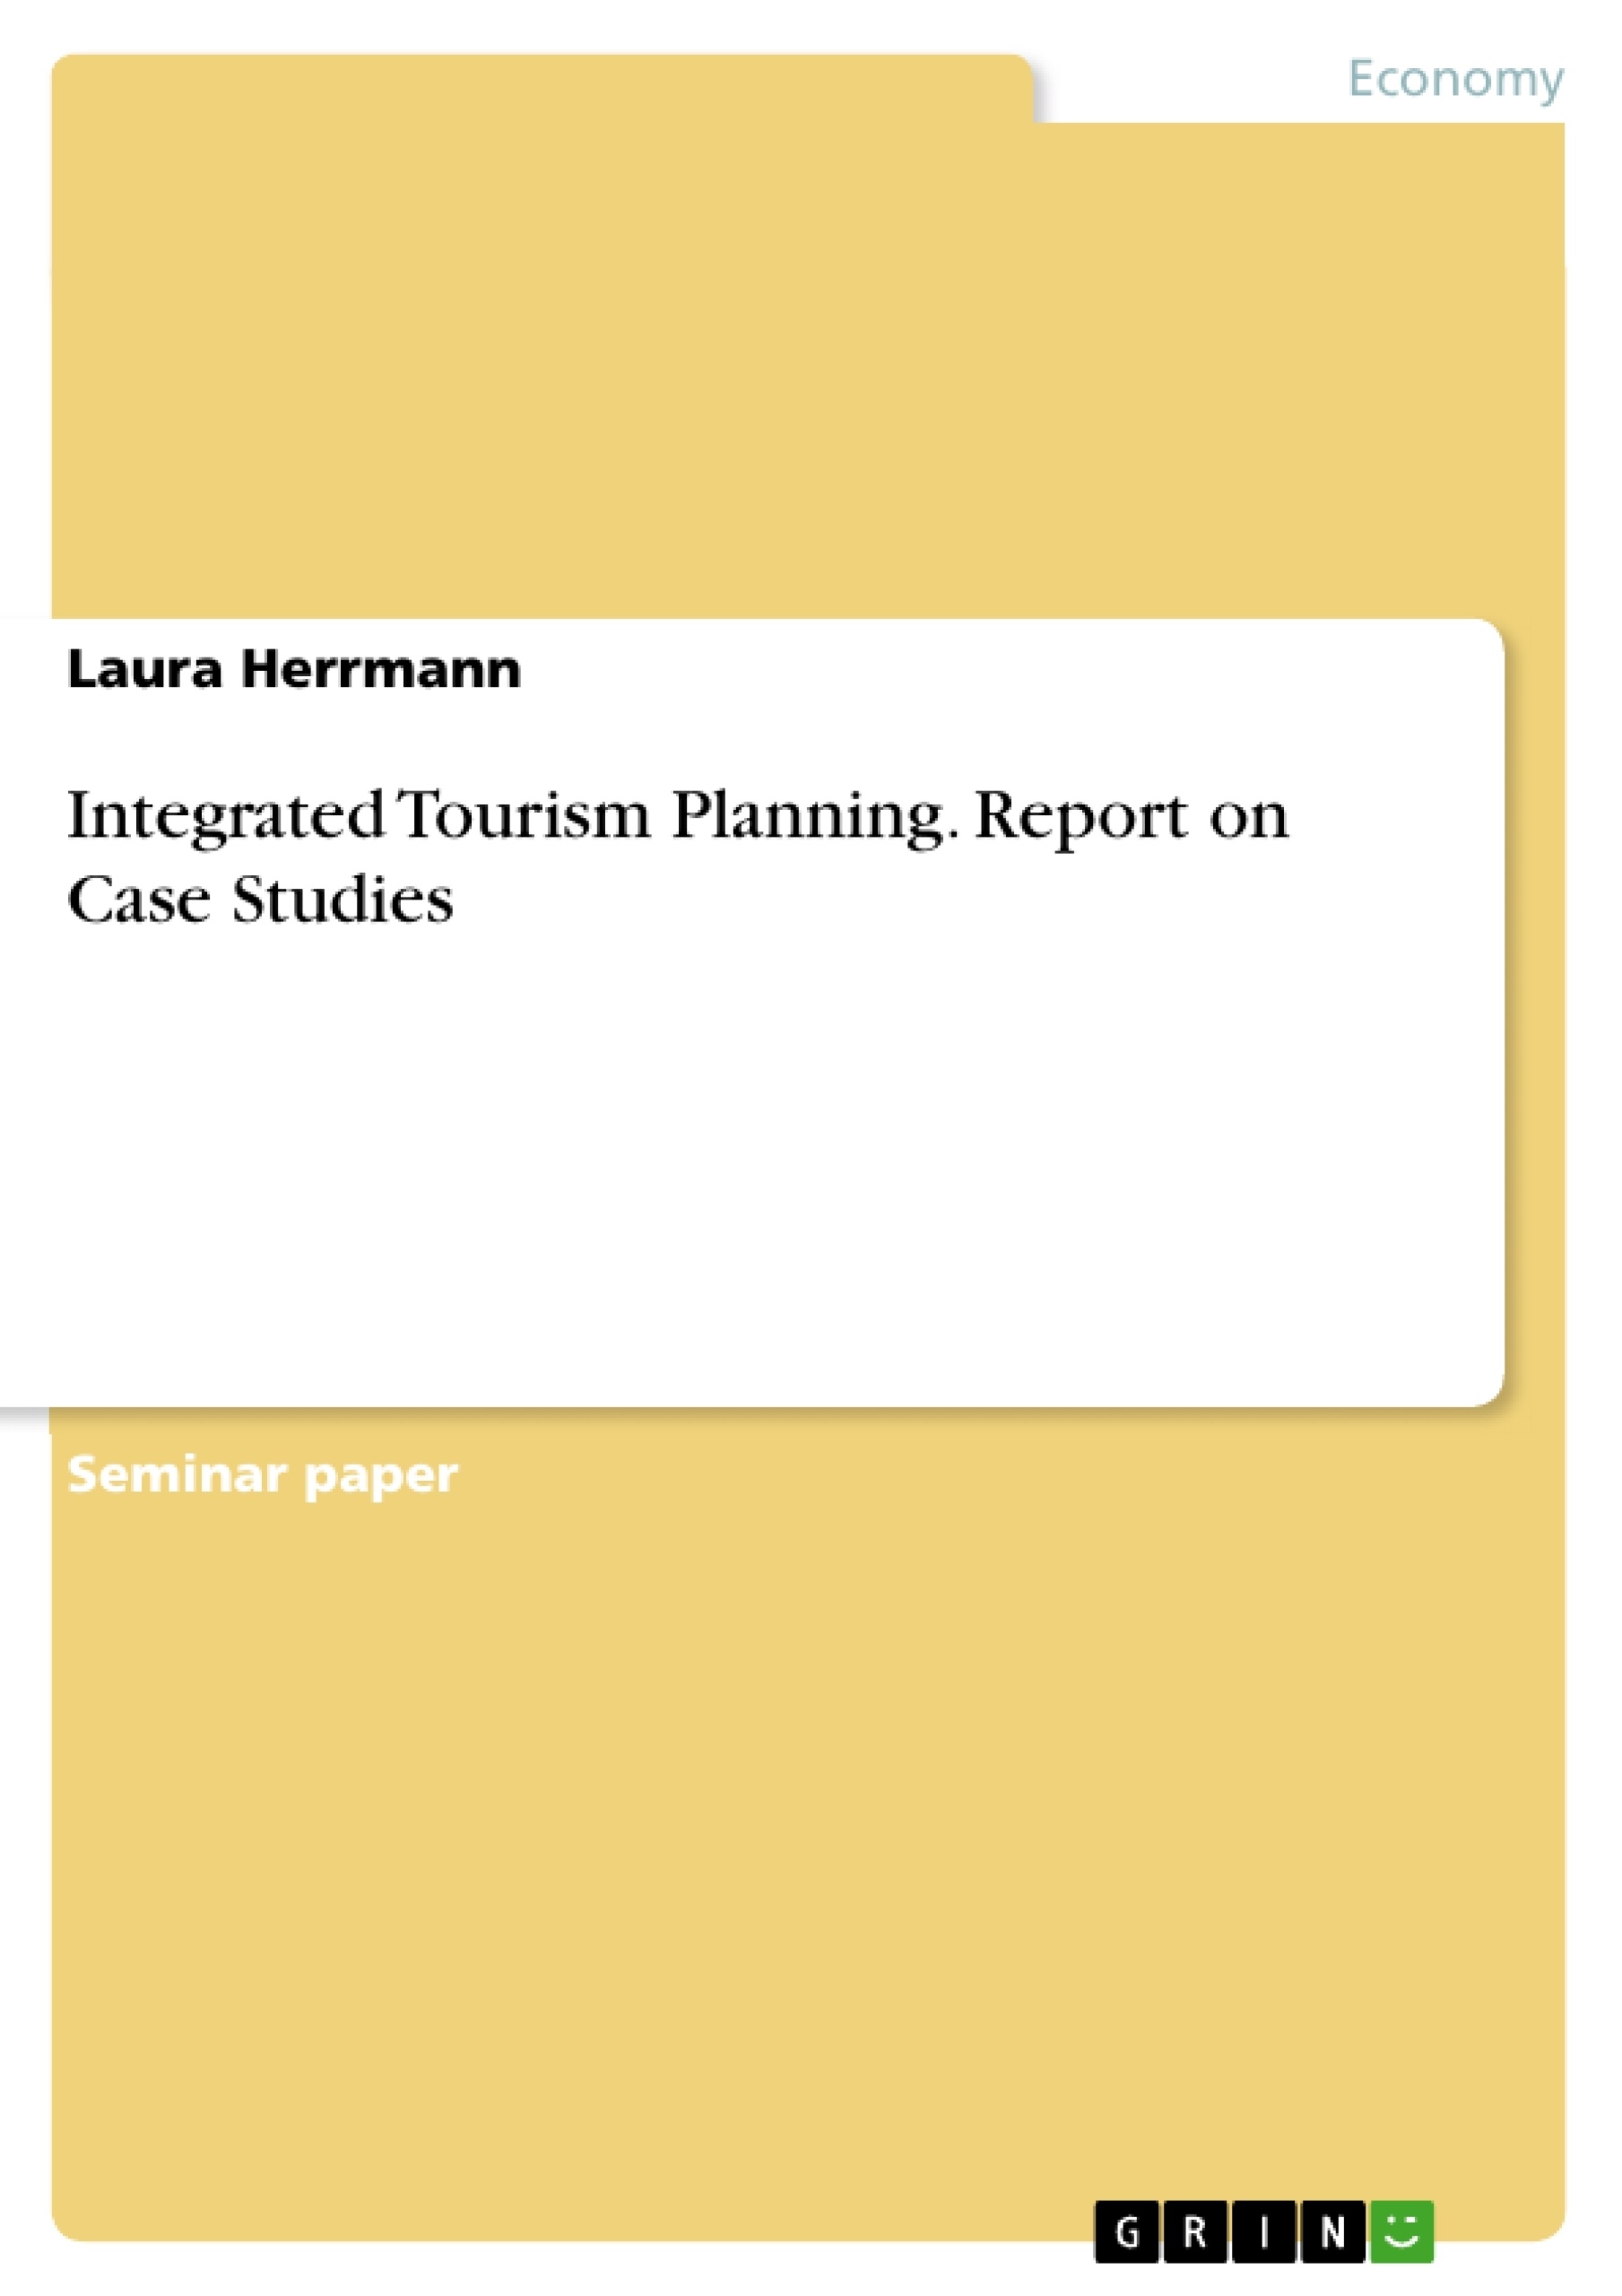 Title: Integrated Tourism Planning. Report on Case Studies